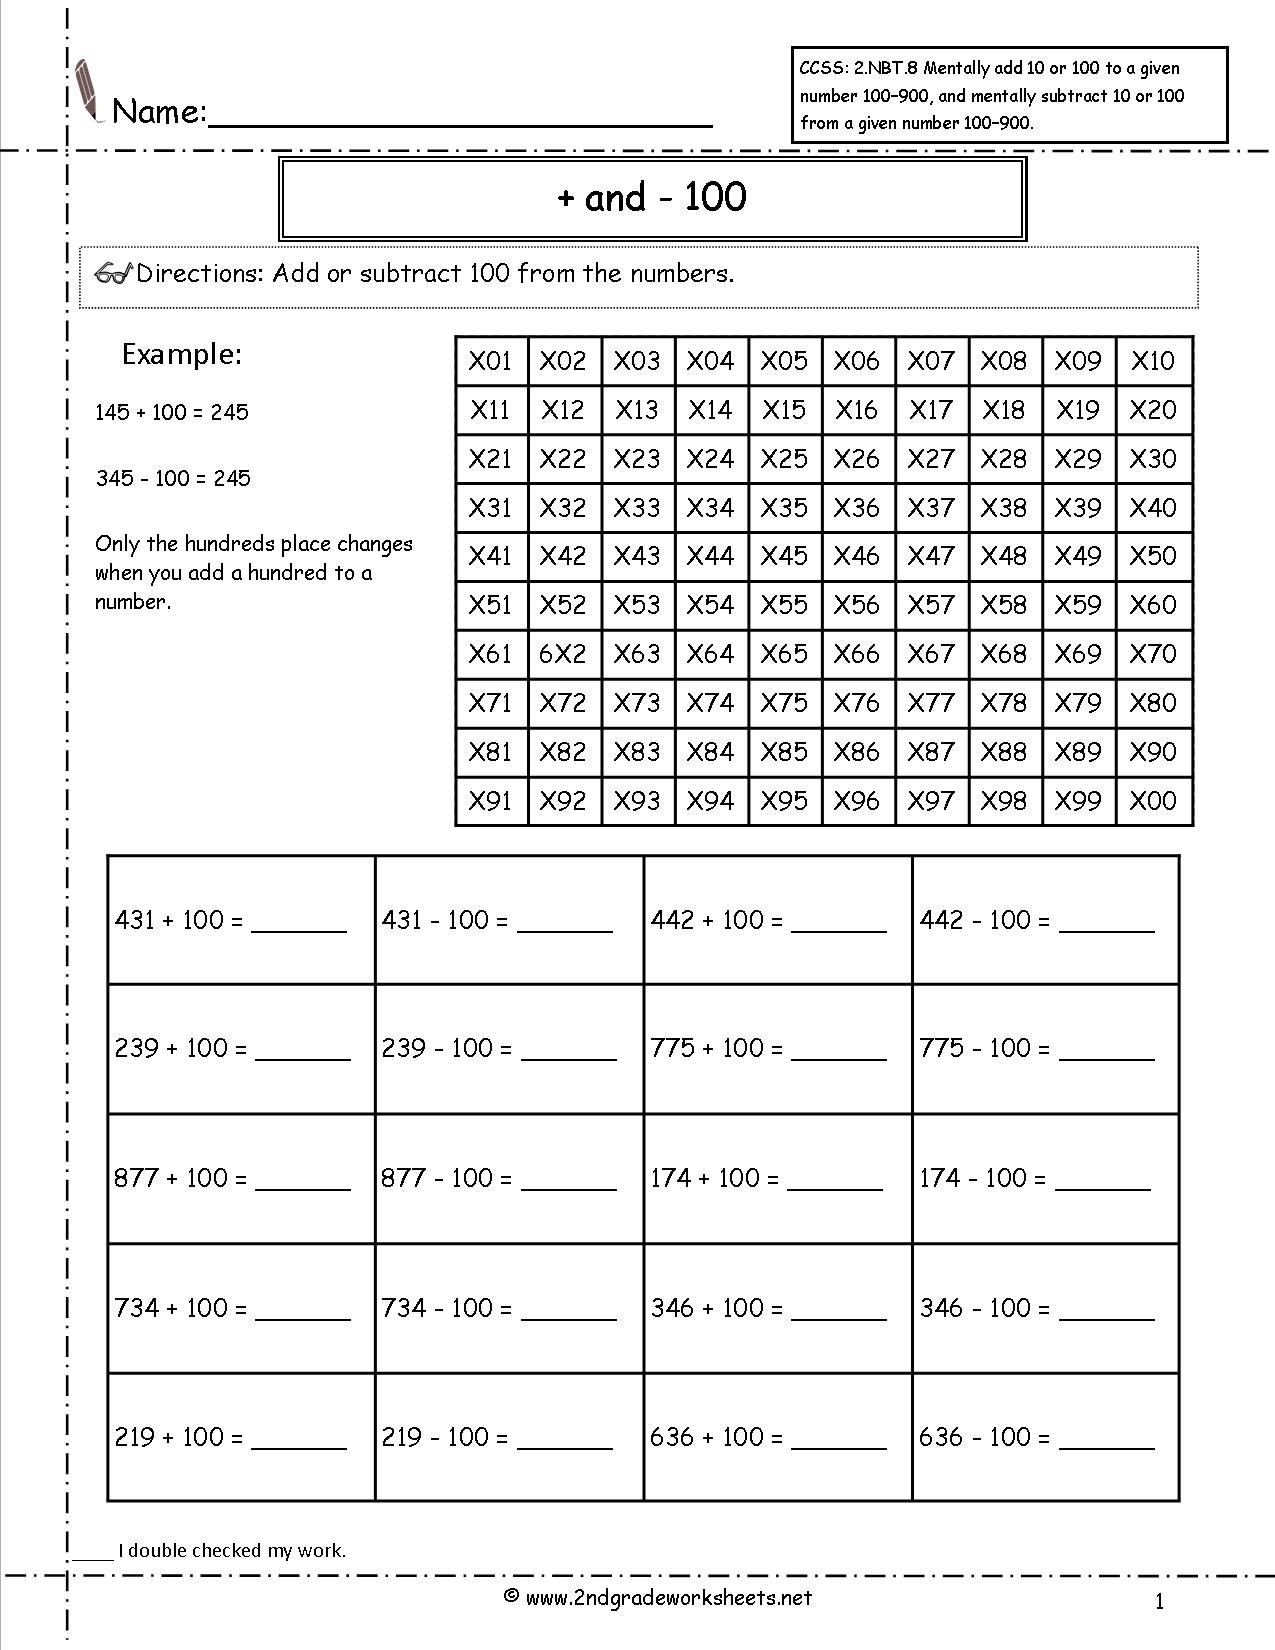 Mentally Adding 10 and 100 Worksheets Image